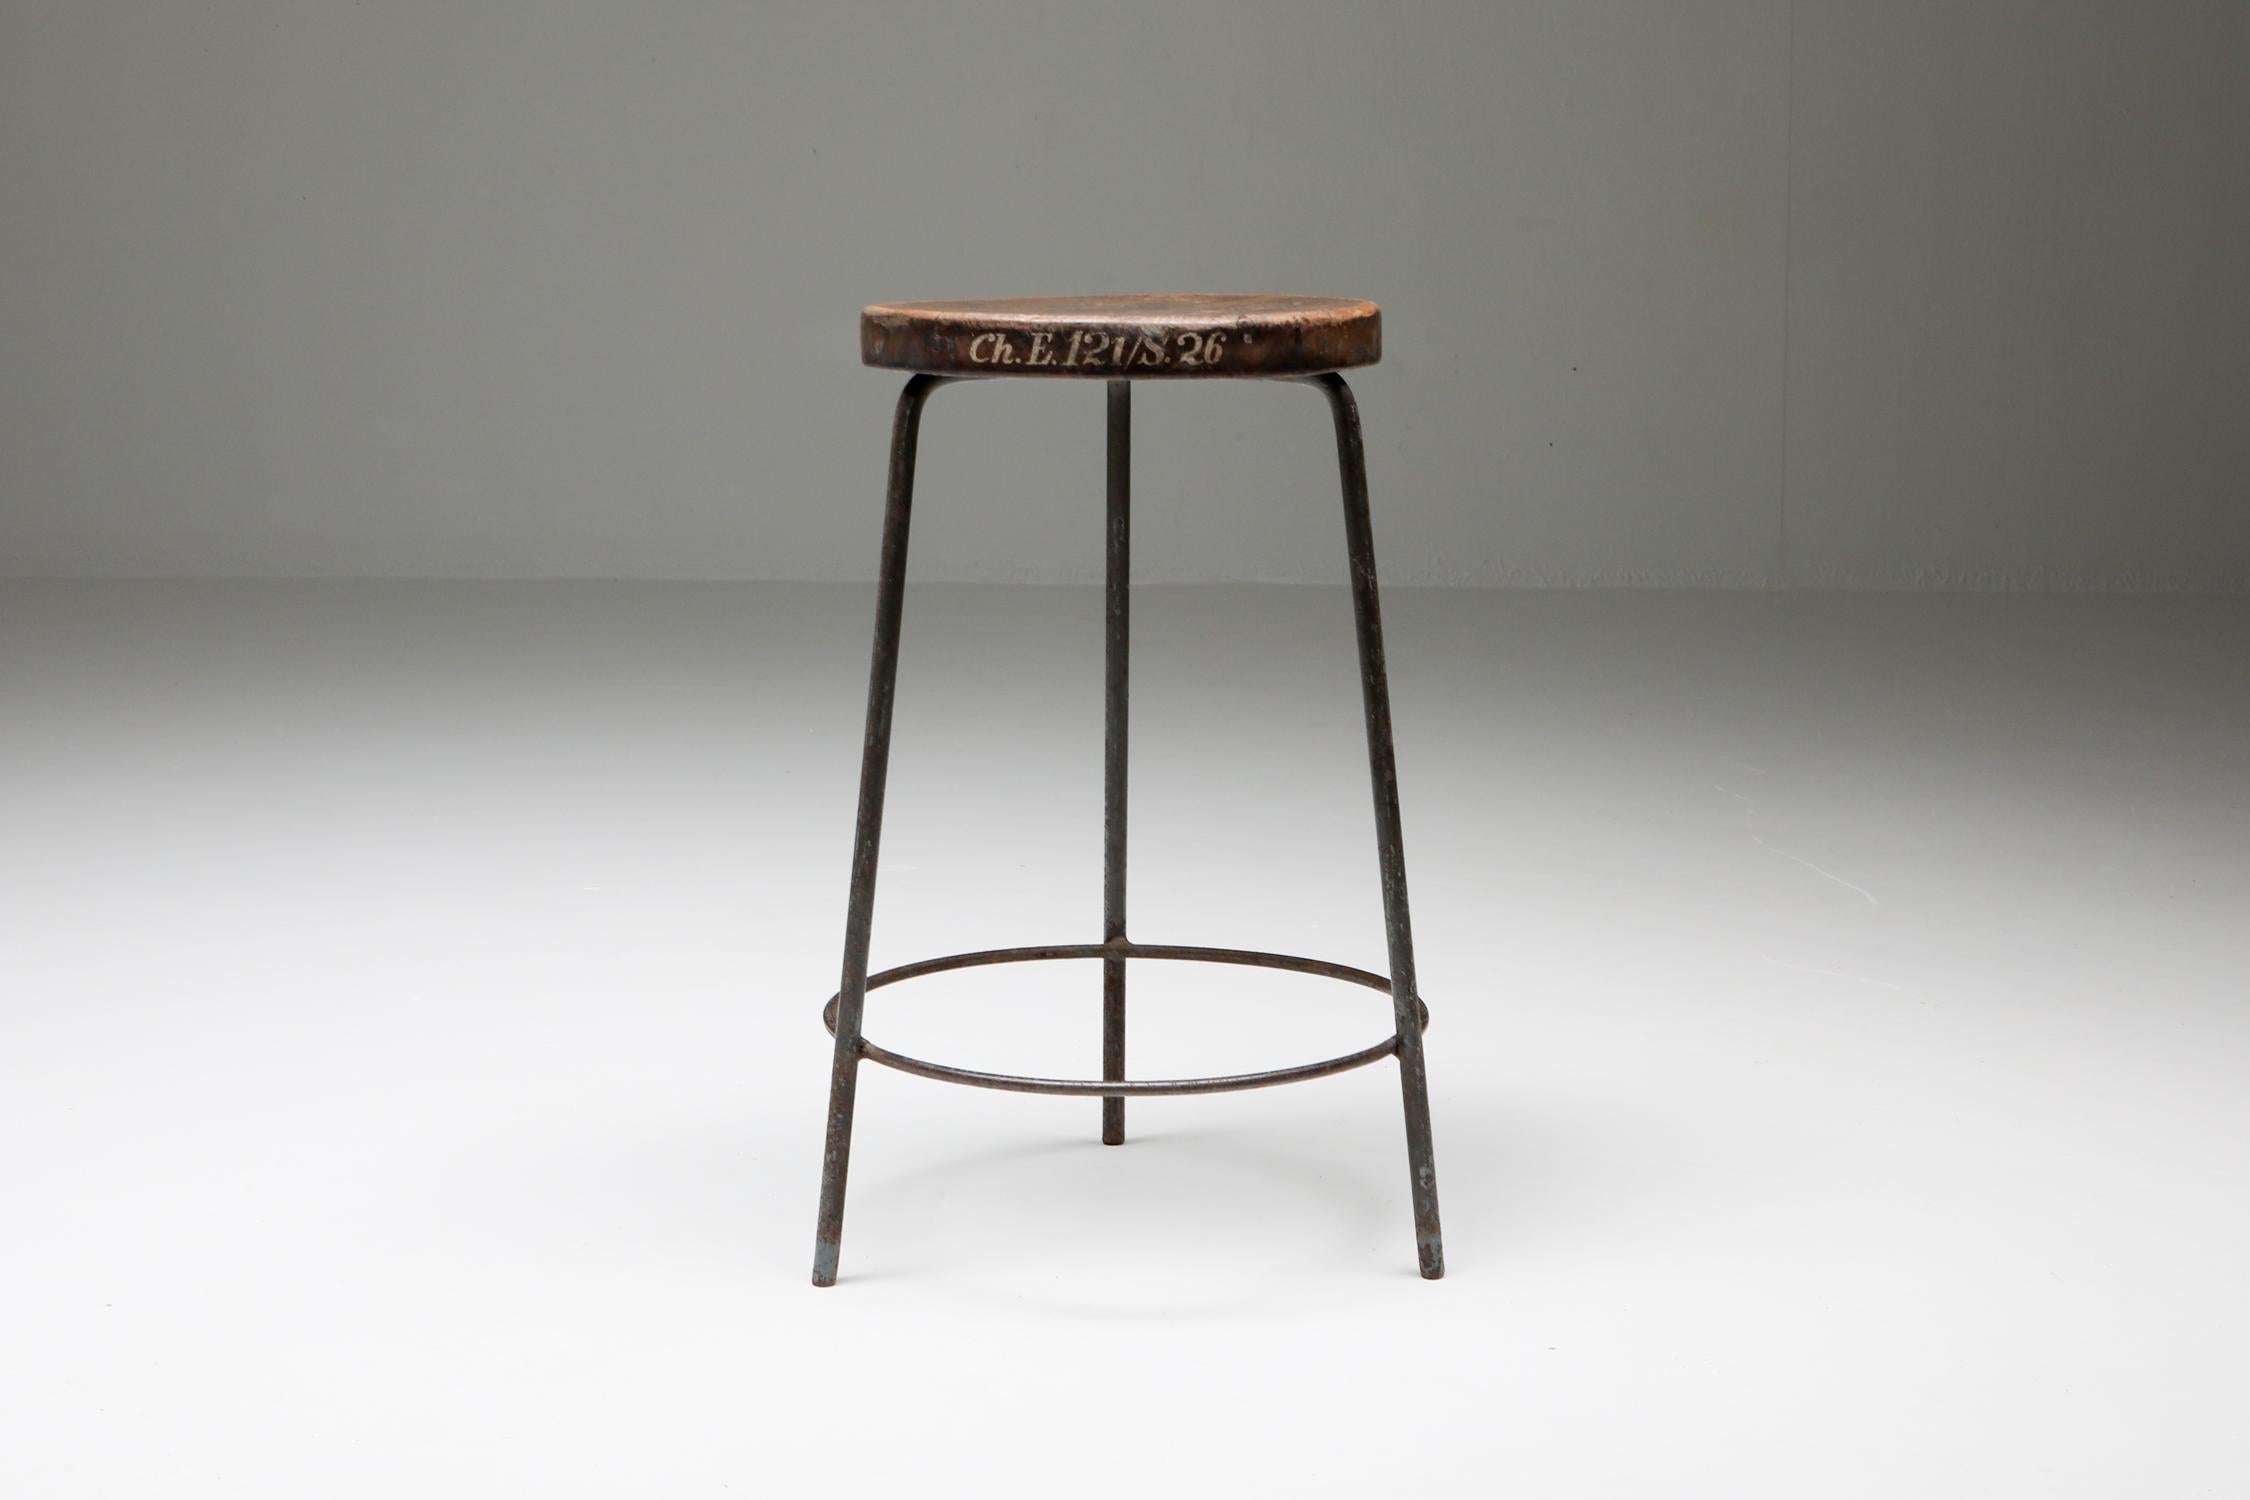 Pierre Jeanneret, tripod stool, teak and iron, circa 1960

Medium height stool in solid teak and iron. Round tripod structure in welded iron, lacquered grey, with a circular footrest bar. Round seat in teak, slightly concave.
Provenance and